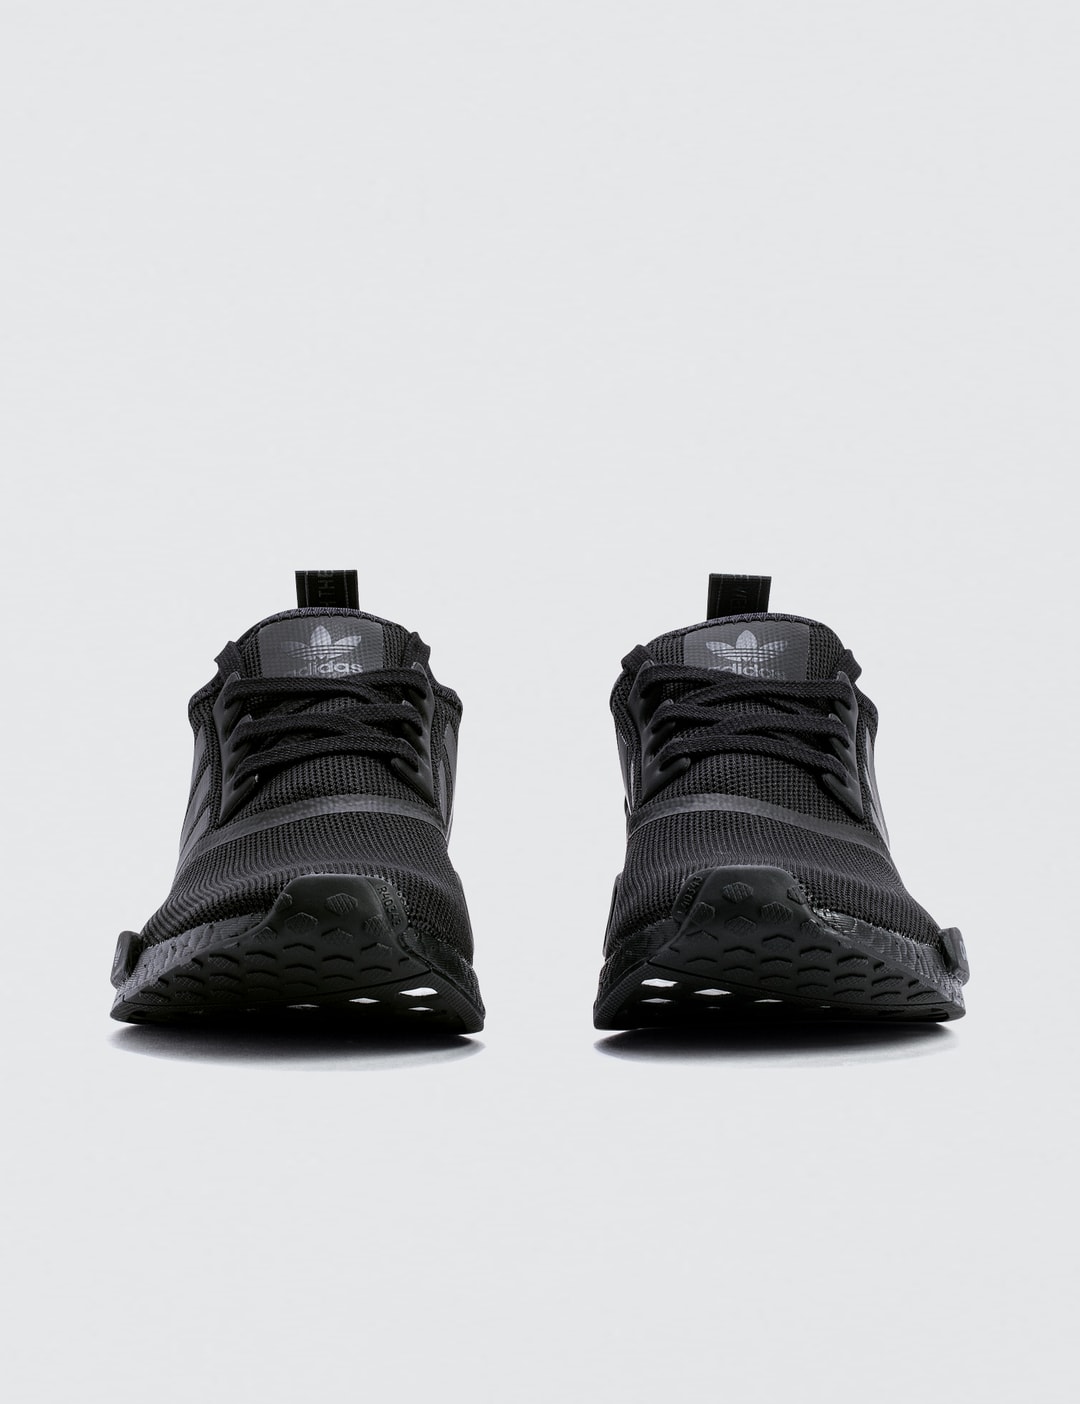 Modtagelig for Underlegen beskæftigelse Adidas Originals - NMD R1 "Triple Black" | HBX - Globally Curated Fashion  and Lifestyle by Hypebeast